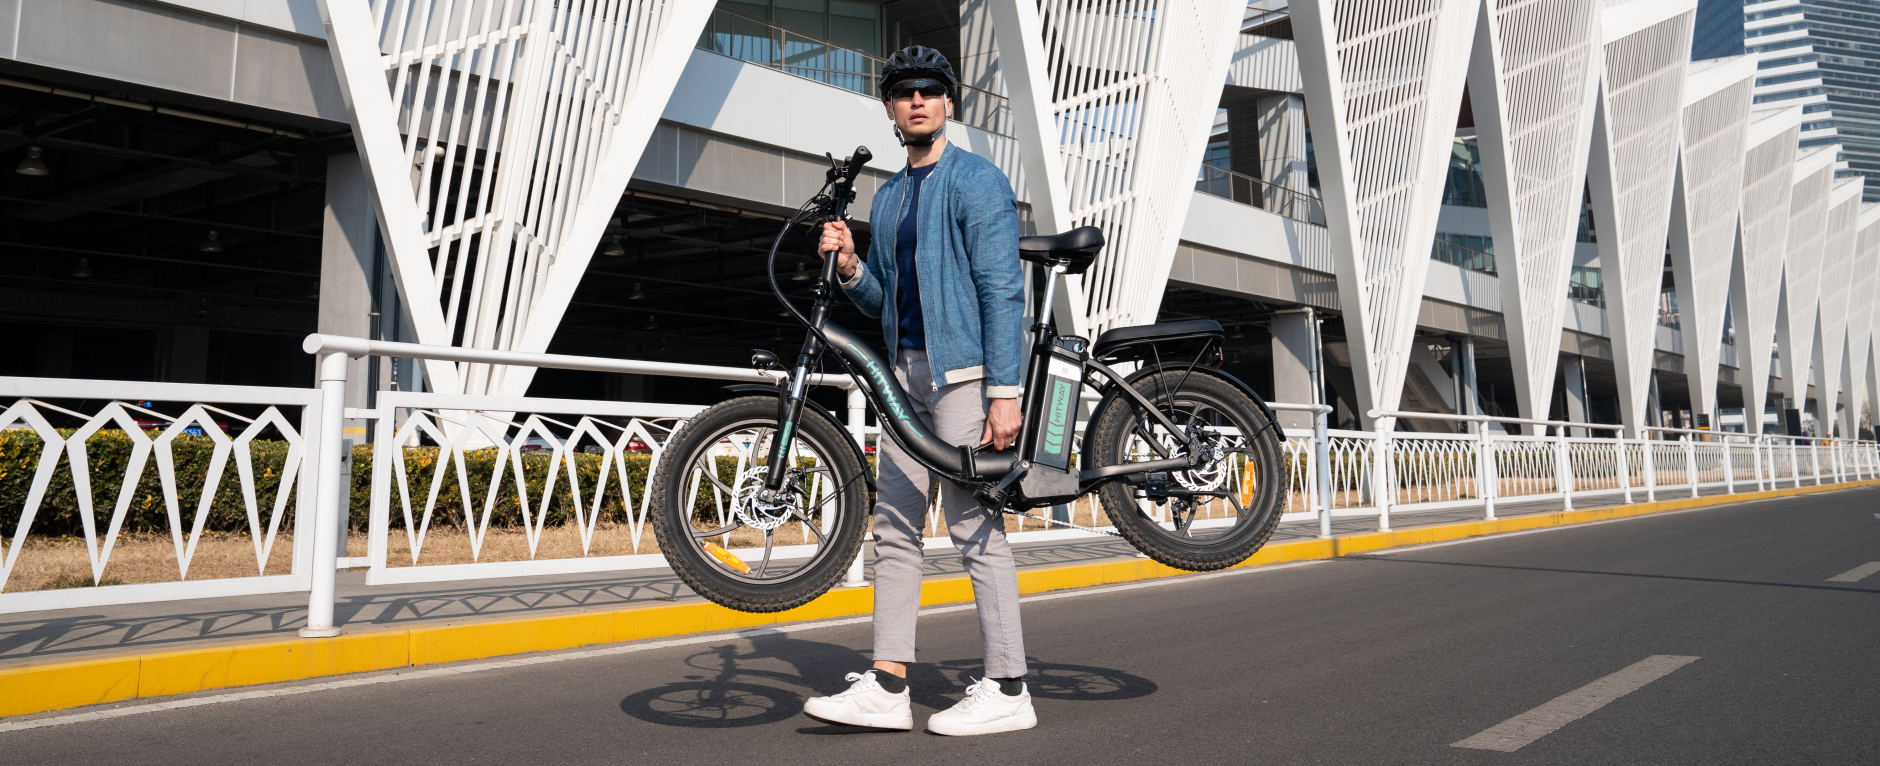 Want a convenient bike? Introducing 4 lightweight bikes from HITWAY.